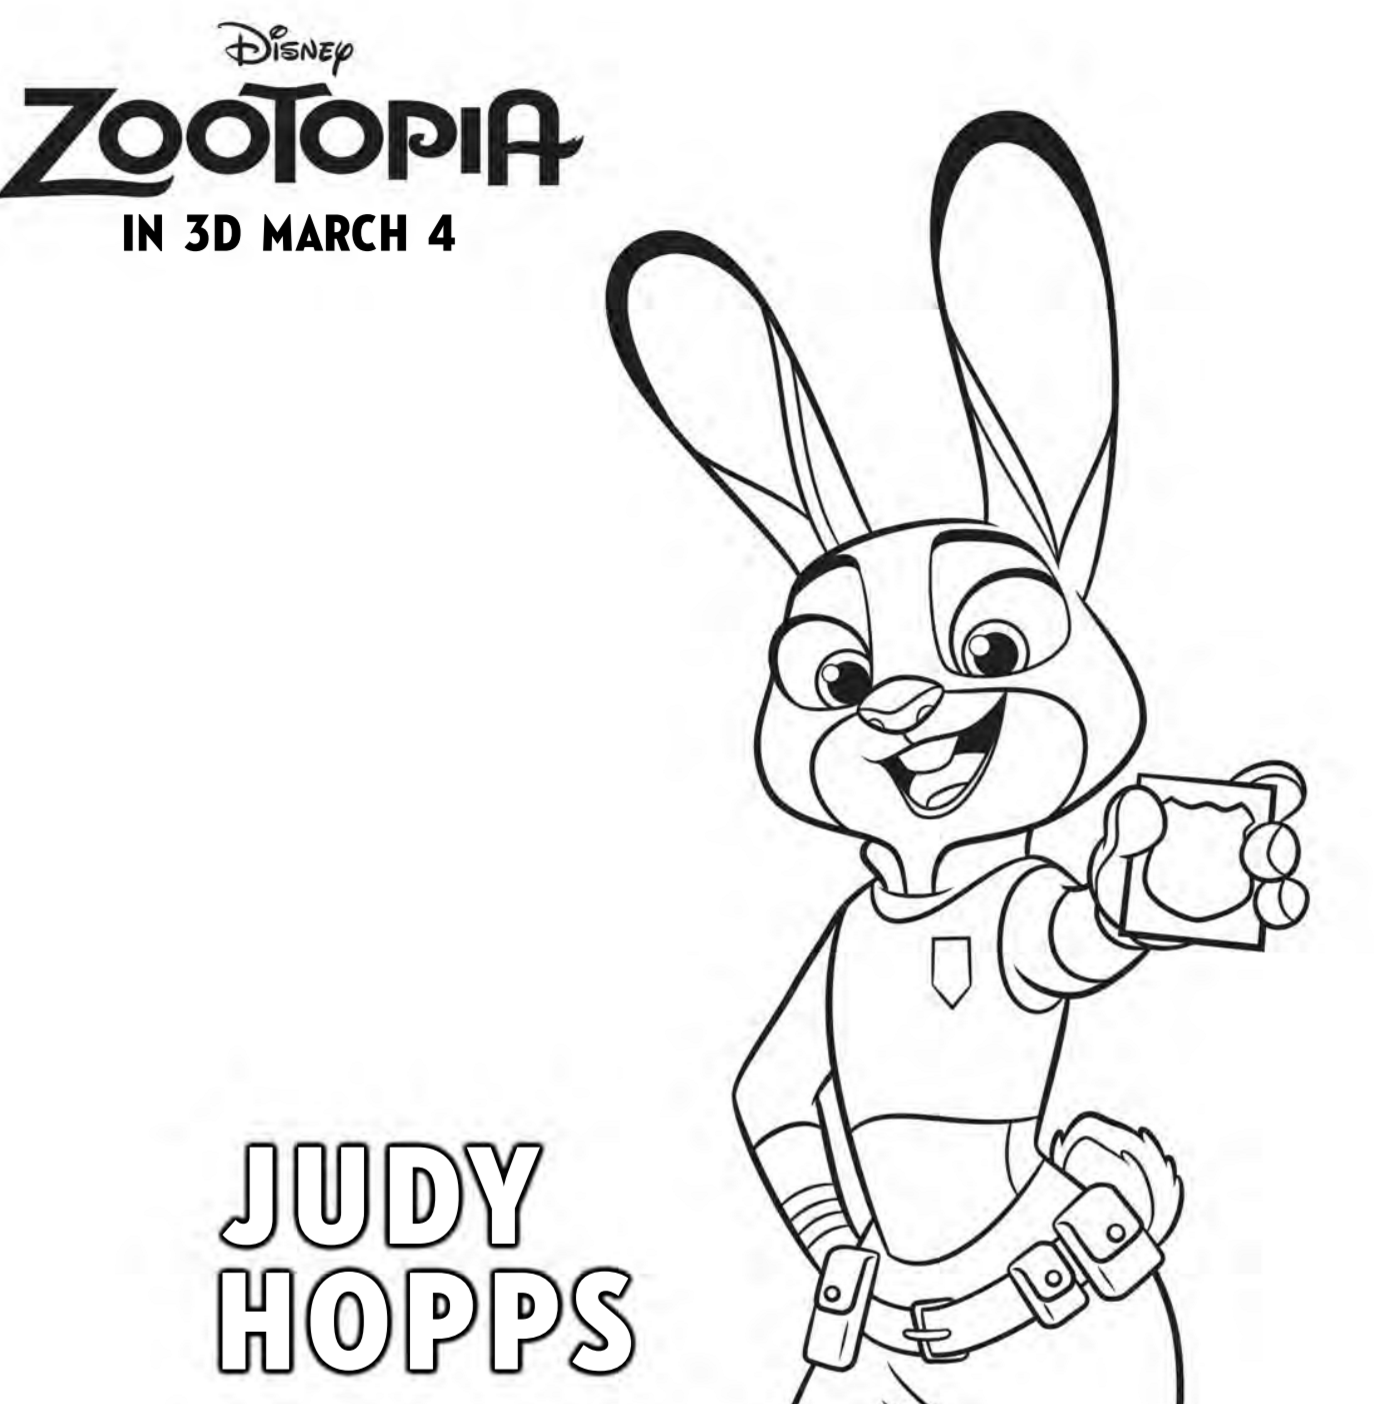 Zootopia Coloring Pages - Free Printables For The Kids #ZootopiaEvent -  Lady and the Blog